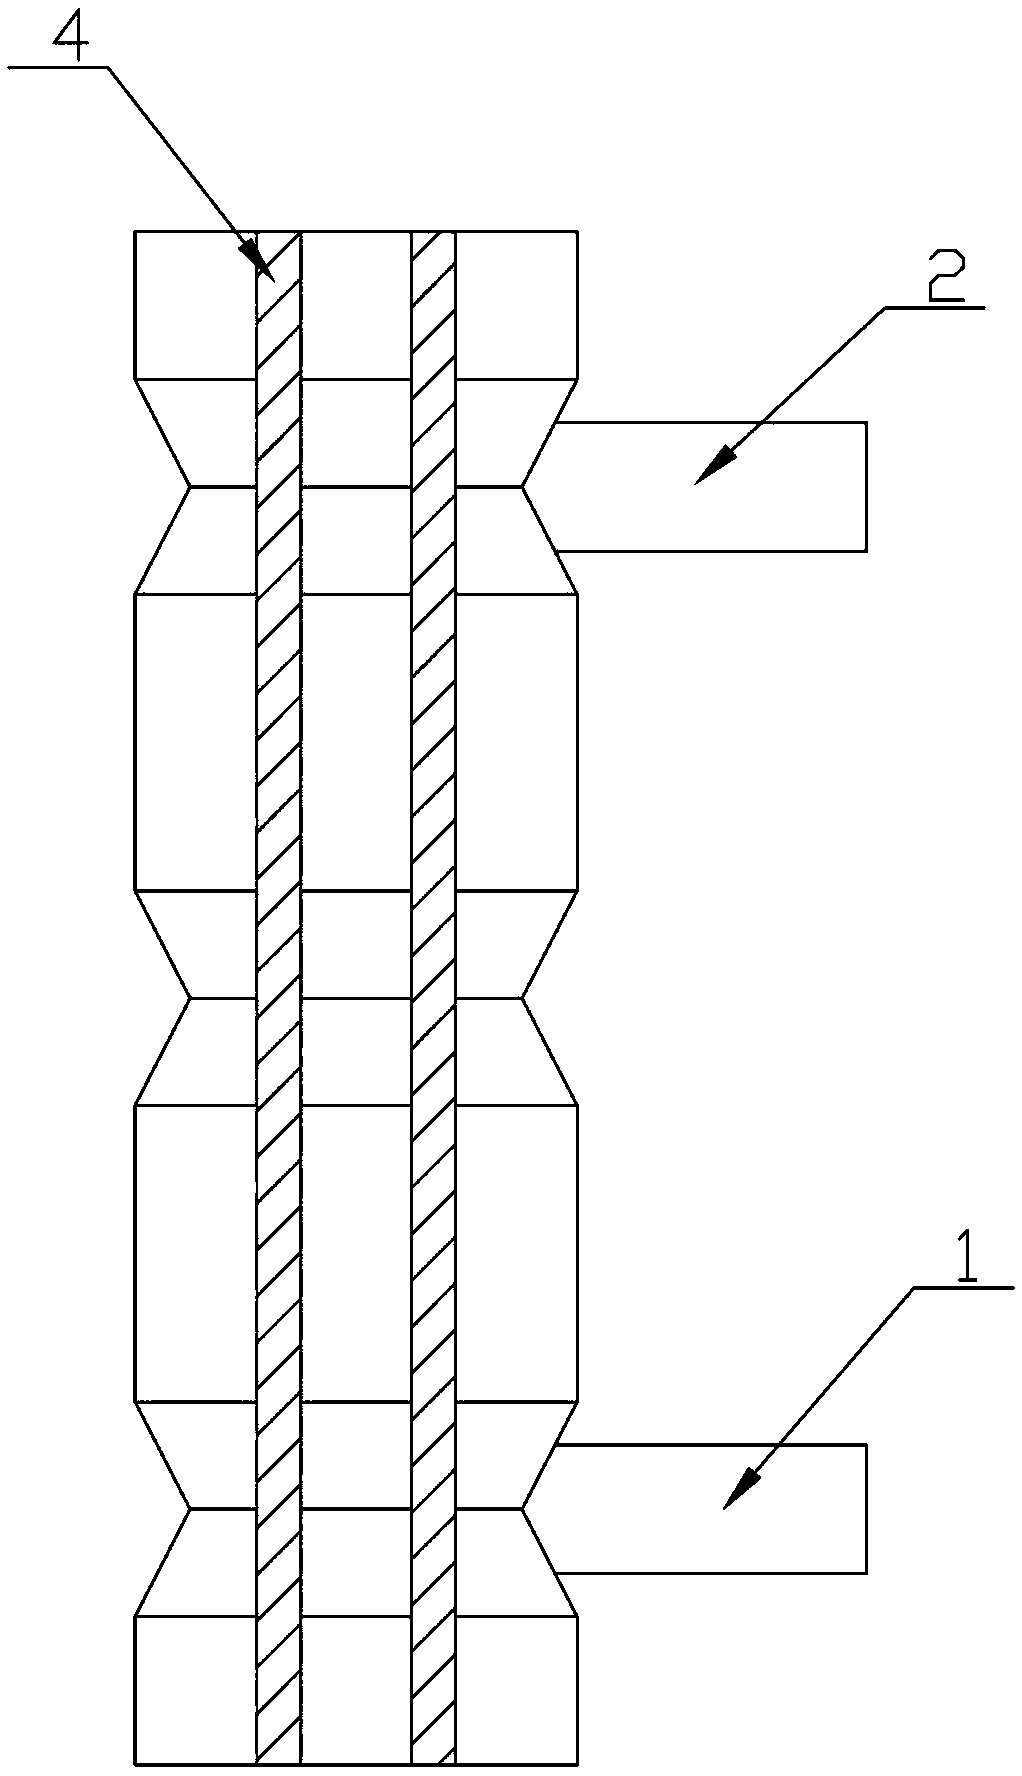 Grout sleeve with function of coordination deformation with concrete for prefabricated components